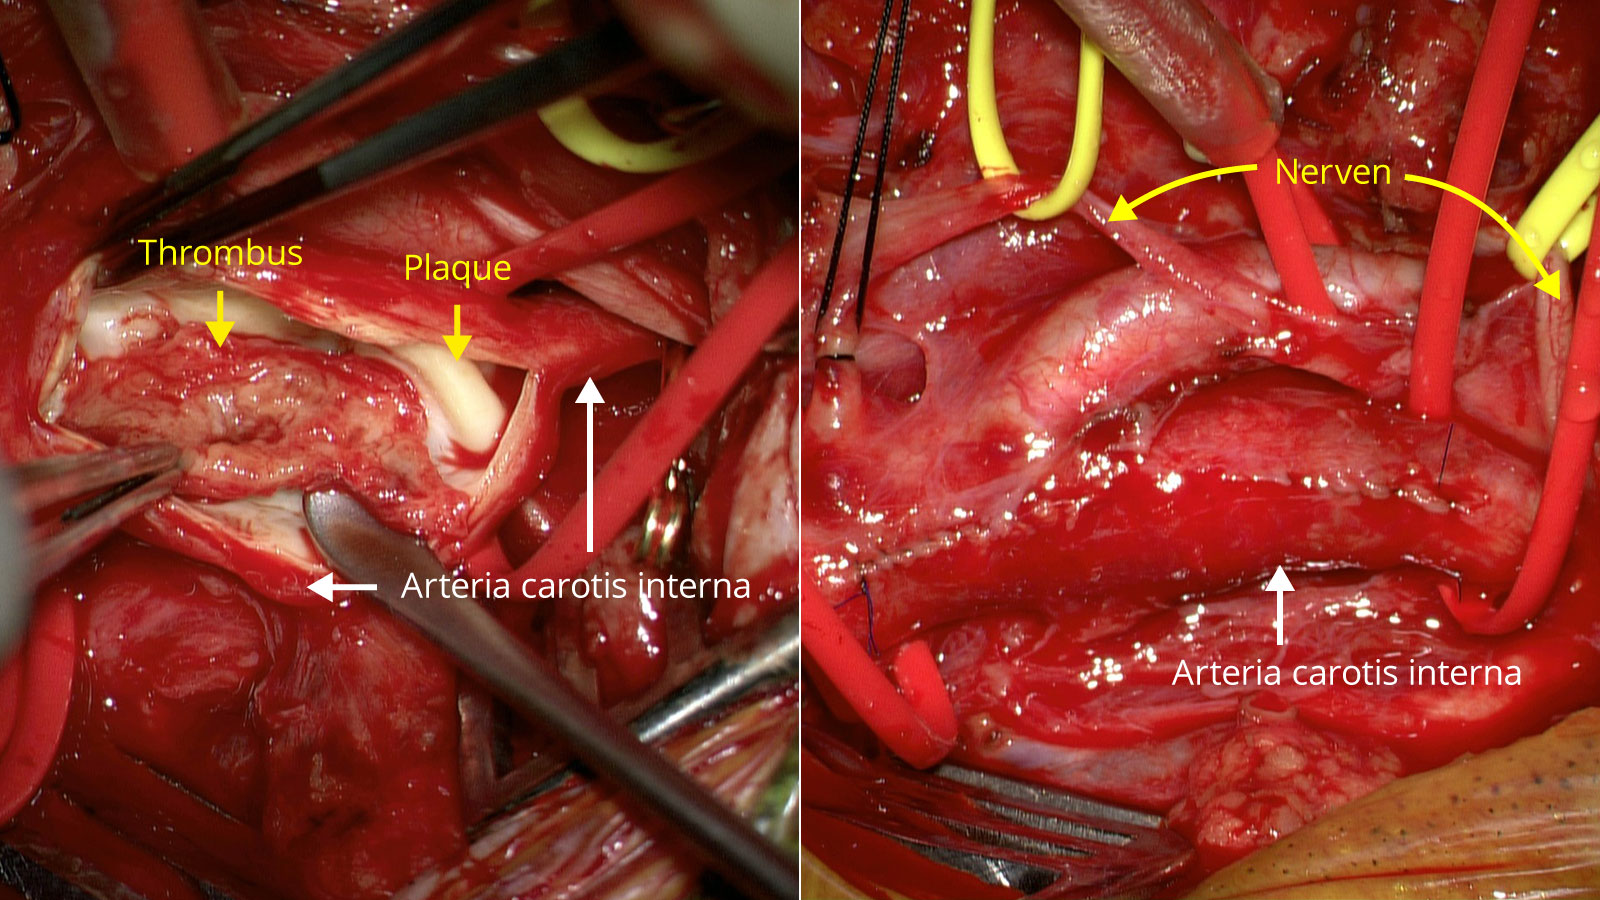 Two surgery photos side by side. Left: thrombus in the carotid artery, right: image after surgery.